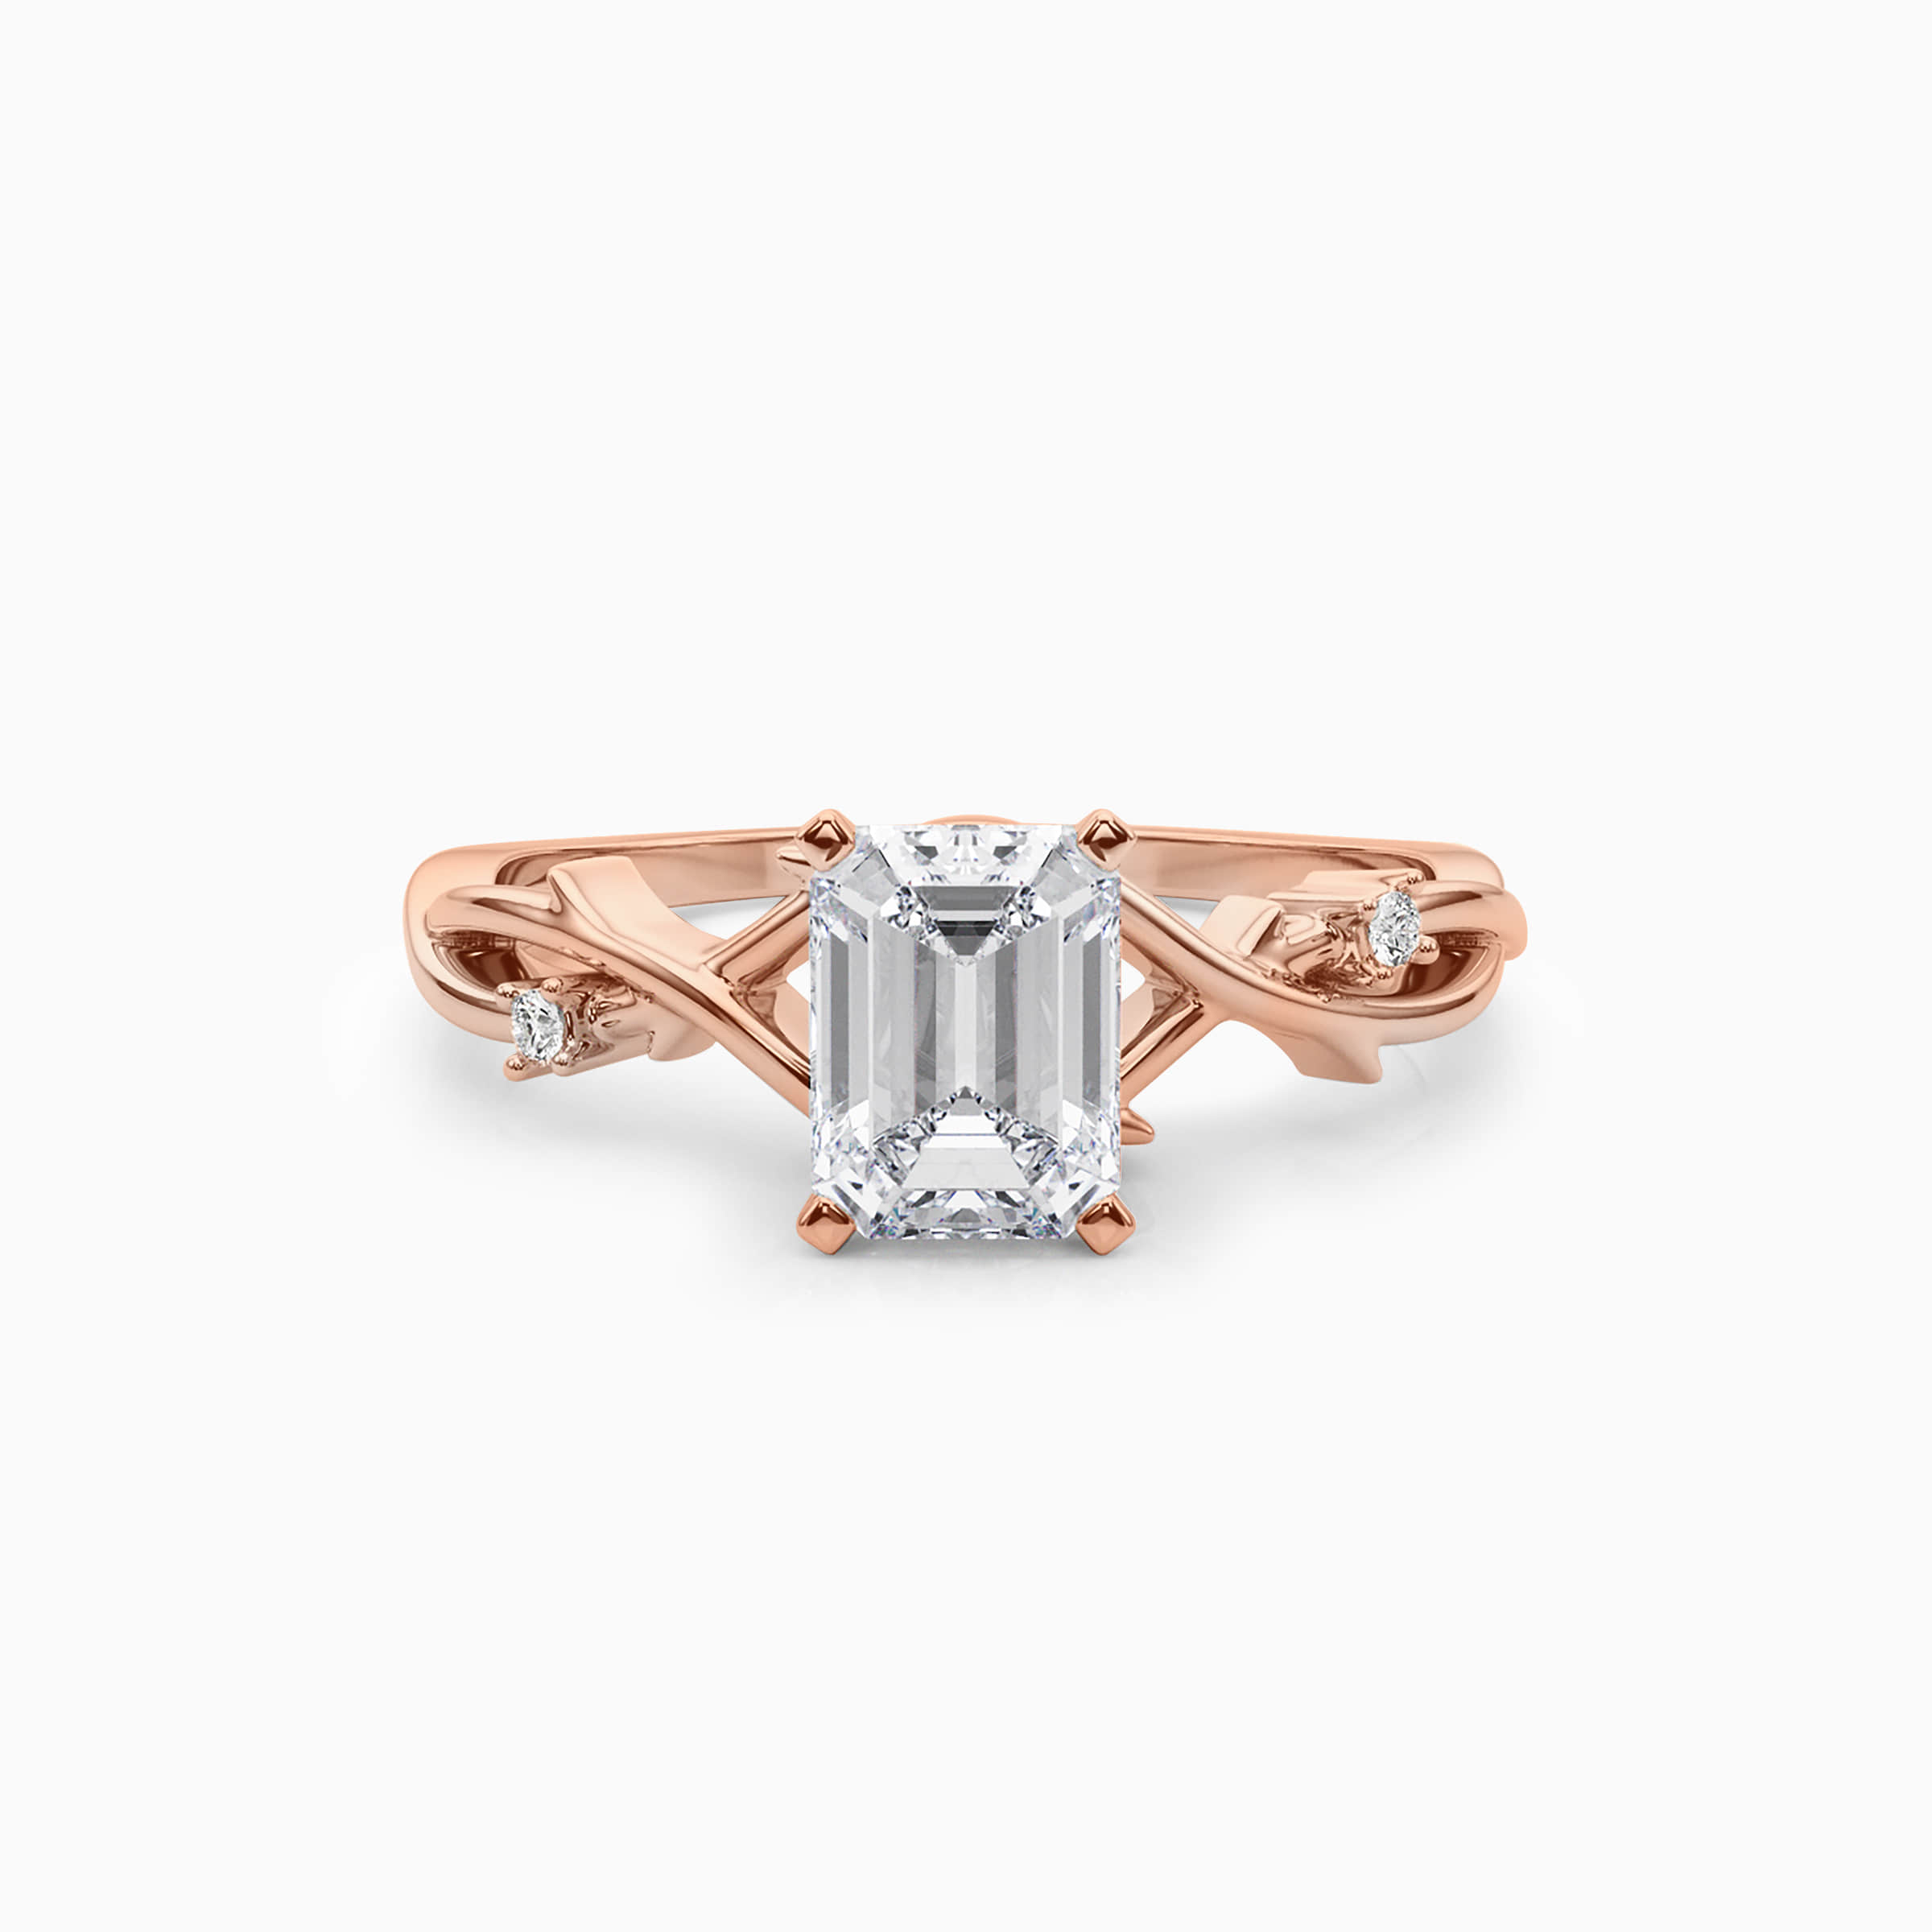 Darry Ring emerald cut engagement ring with twisted band in rose gold